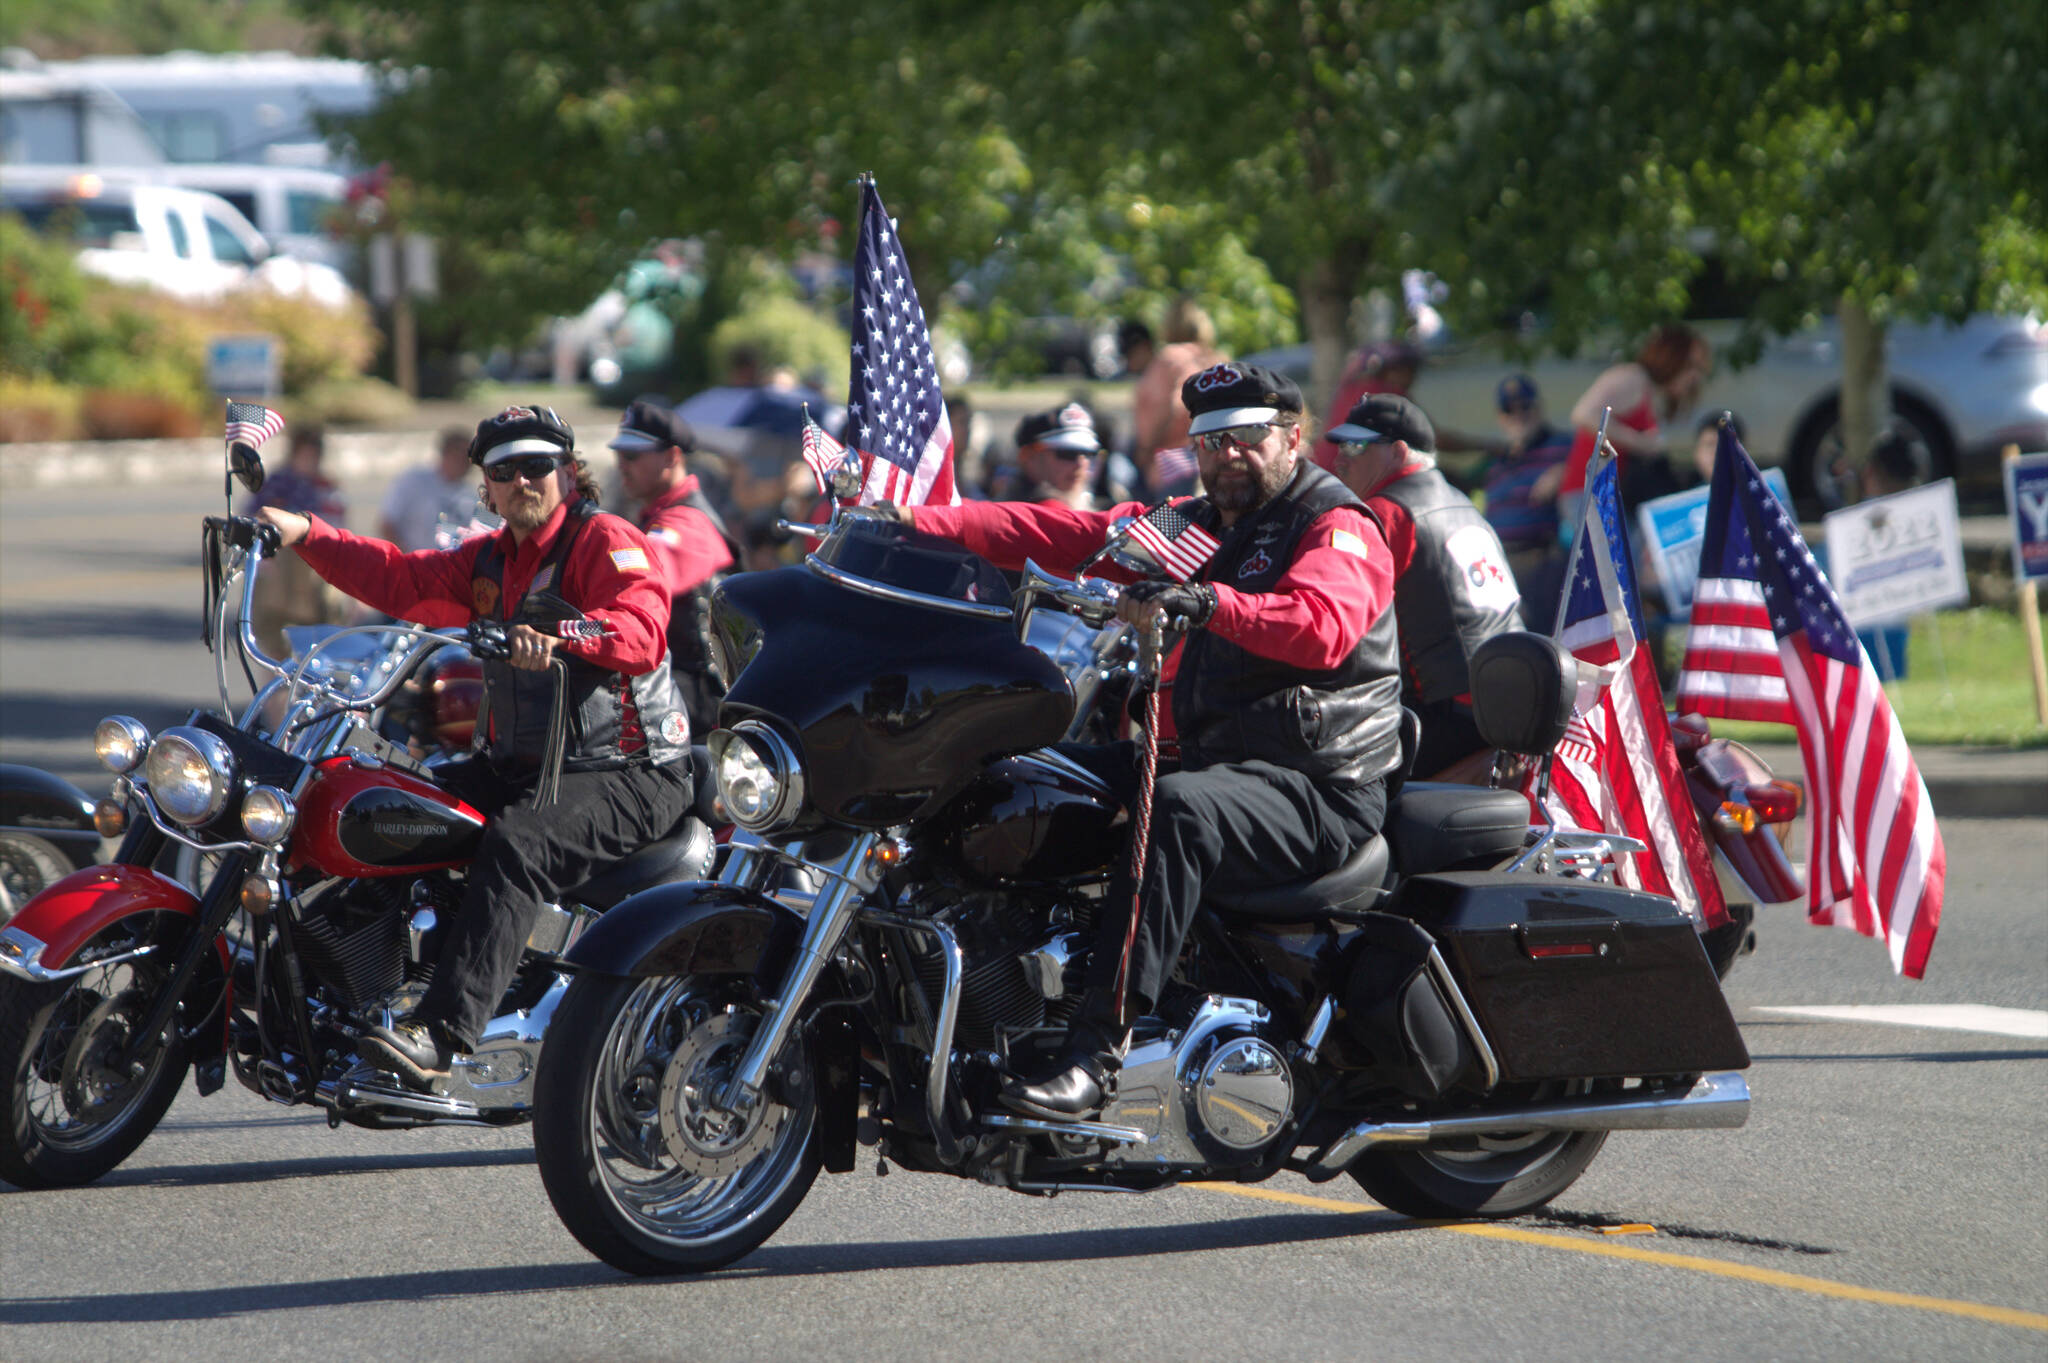 Motorcyclists weave through each other during a pre-parade demonstration. Elisha Meyer/Port Orchard Independent Photos